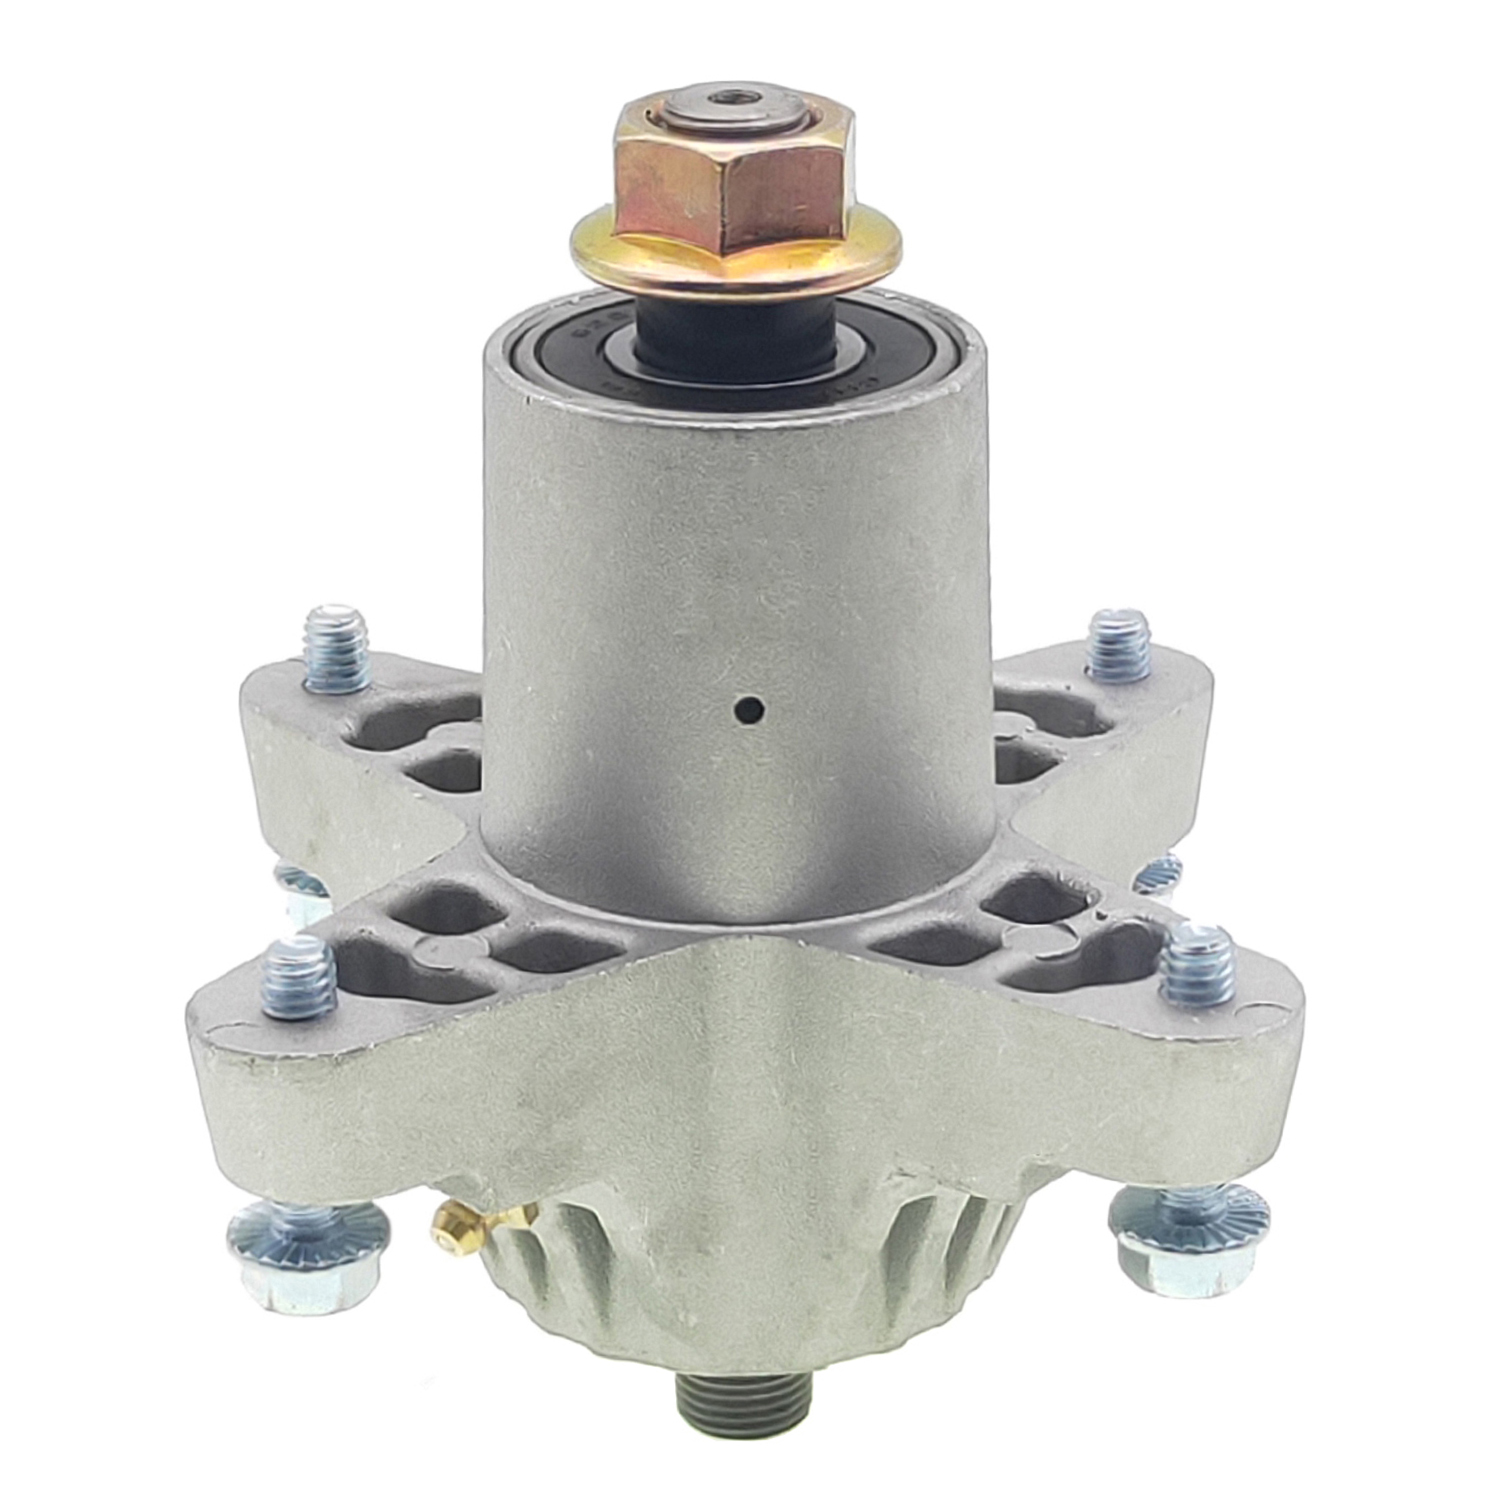 Replacement mower Spindle for MTD 618‐0138, 618‐0138A, 618‐0142, 615‐0142A, 618‐0142C